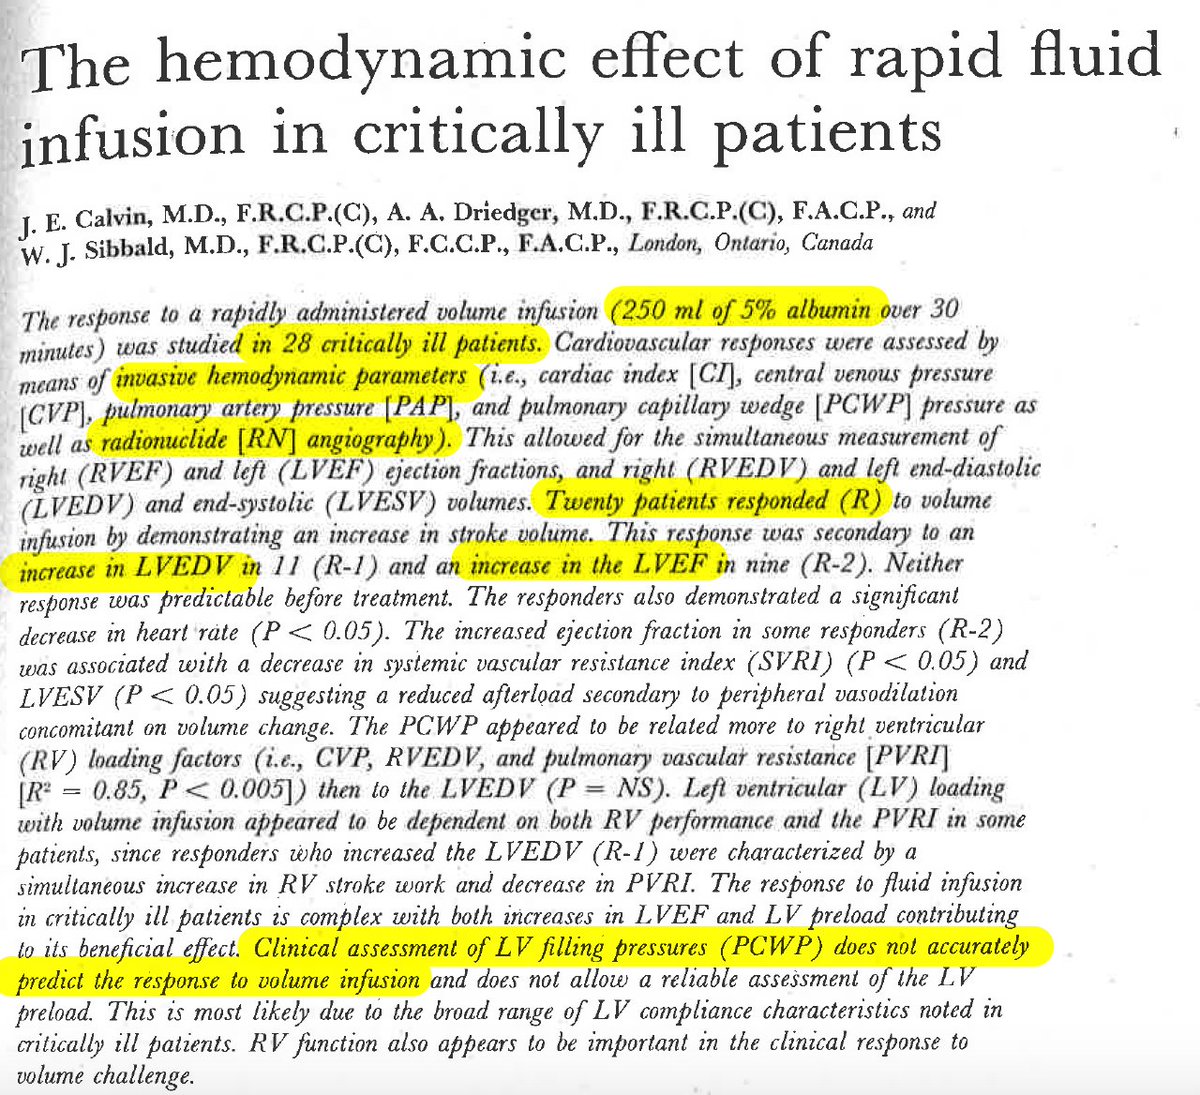 ICU hemodynamics series (history lessons): We were always fascinated by the hemodynamic effects of fluid infusion. Let's dive in this paper from 40 years ago (Calvin JE et al. Surgery 1981; 90(1): 61-76):